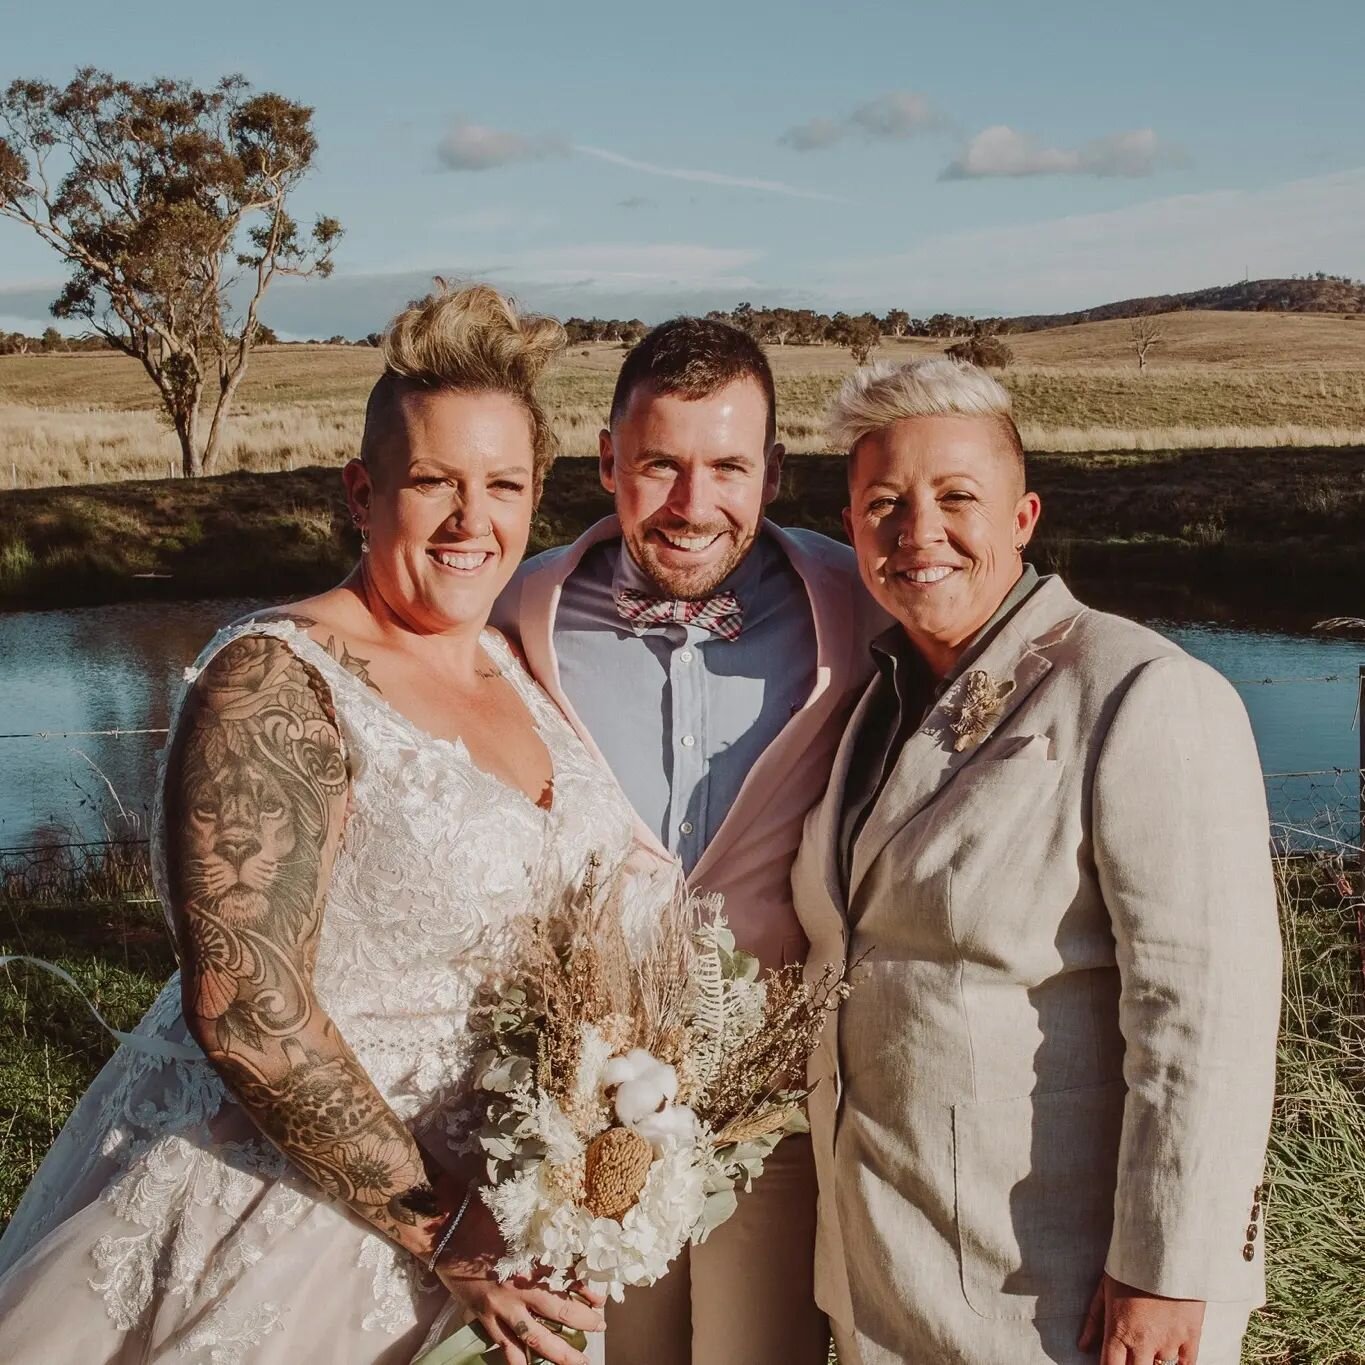 The sunshine and the smiles - sums up the day! ☀️😆
.
Congratulations to @shonnie7 + @breenico__ on saying &quot;I do&quot; earlier this year.
.
Photo credit to 📸@thebeautifulcollective
.
#brides #bride #outdoorwedding